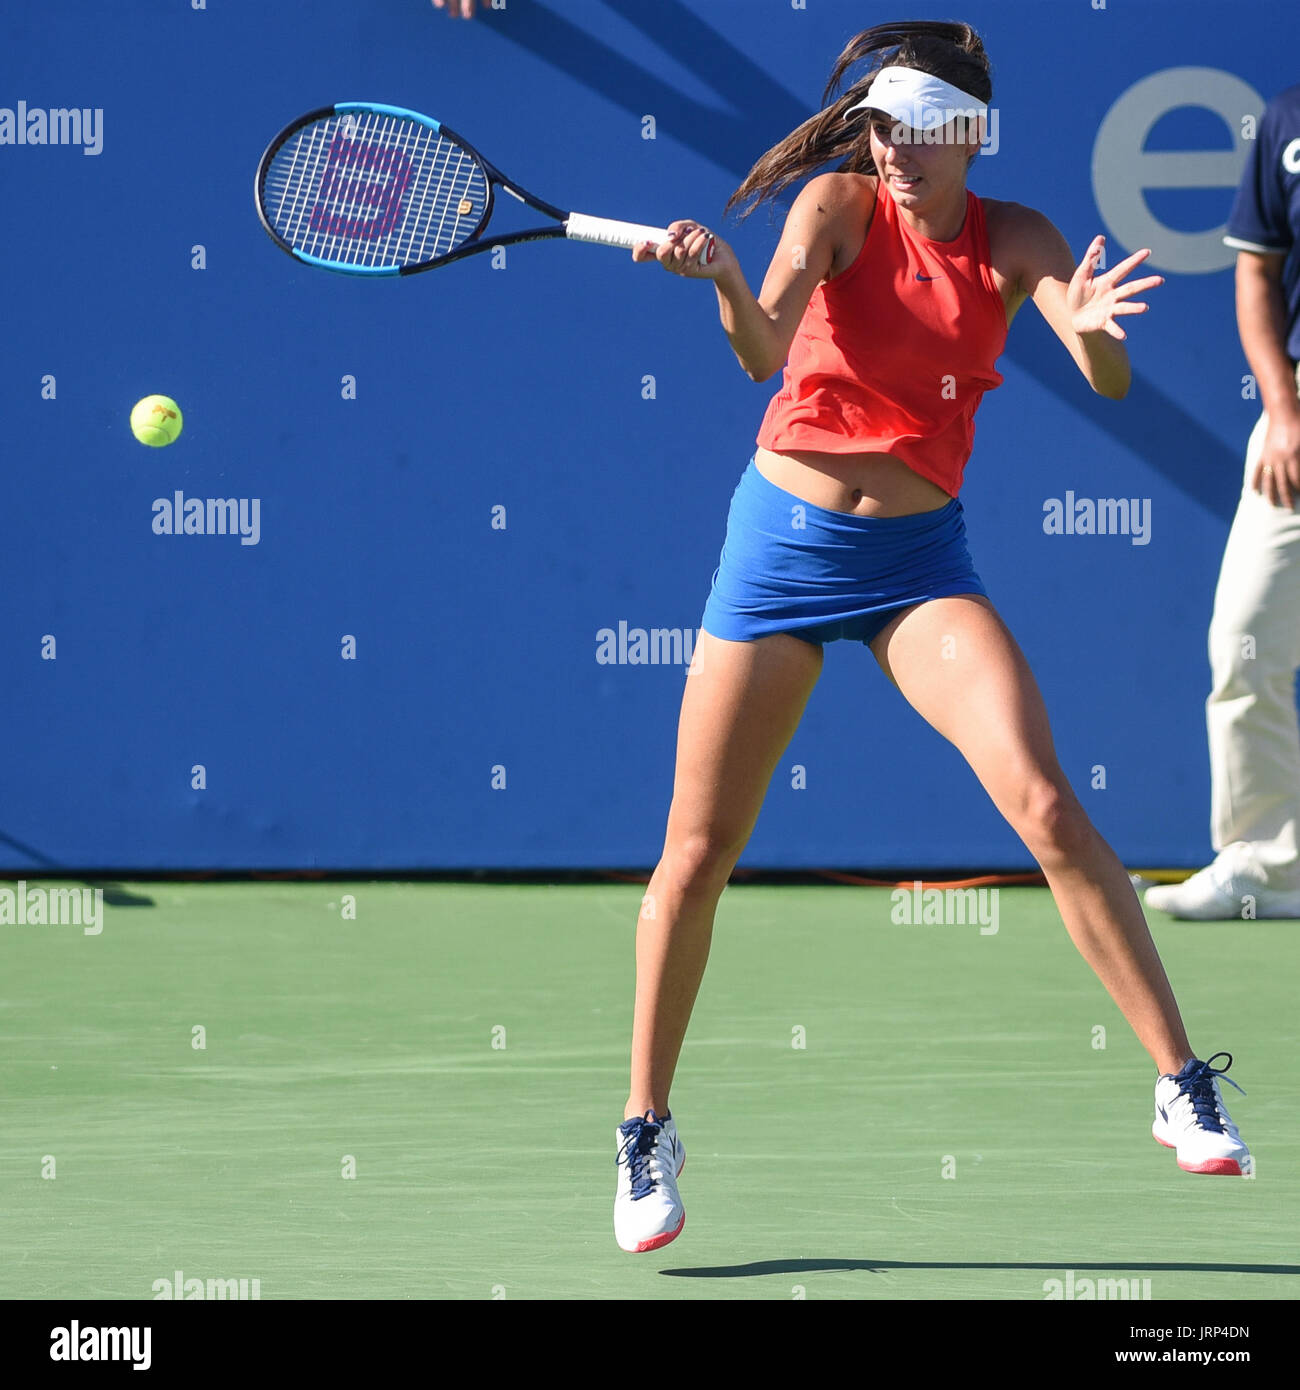 Washington, D.C, USA. 5th Aug, 2017. OCEANE DODIN hits a forehand during  her semifinal match at the Citi Open at the Rock Creek Park Tennis Center  in Washington, DC Credit: Kyle Gustafson/ZUMA